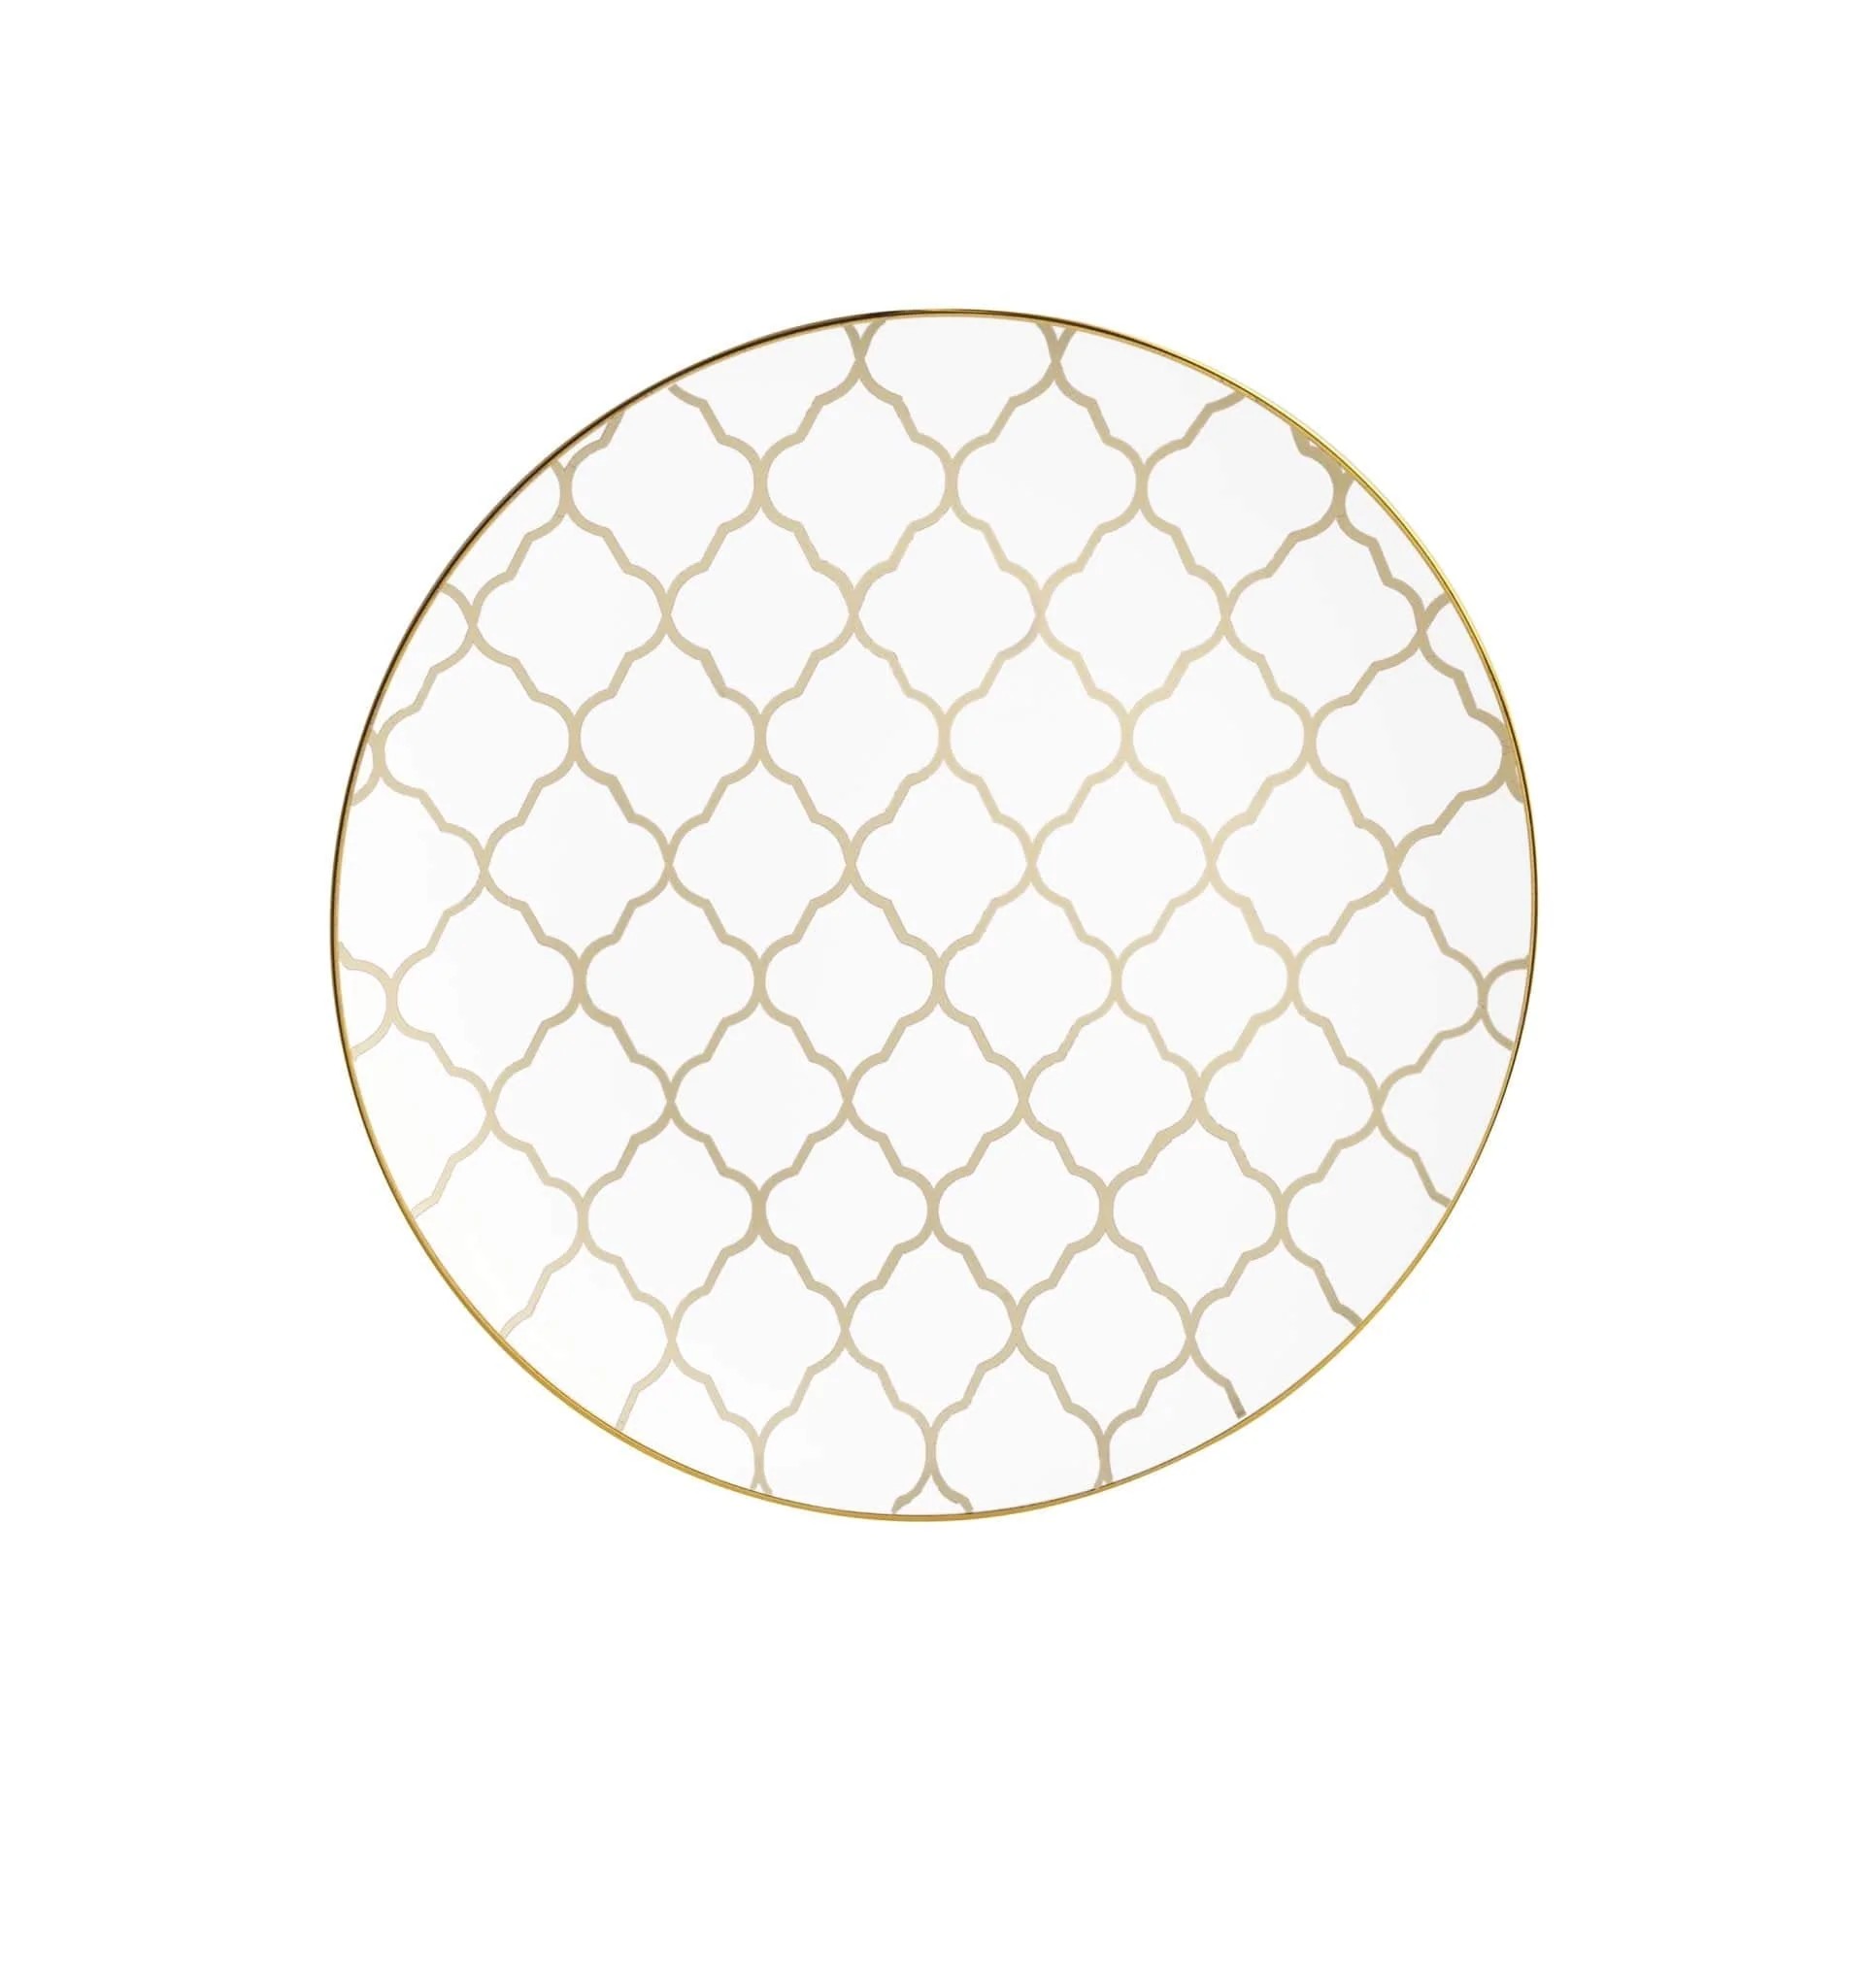 Luxe Party White with Gold Lattice Pattern Plastic Dinner Plate 10.25